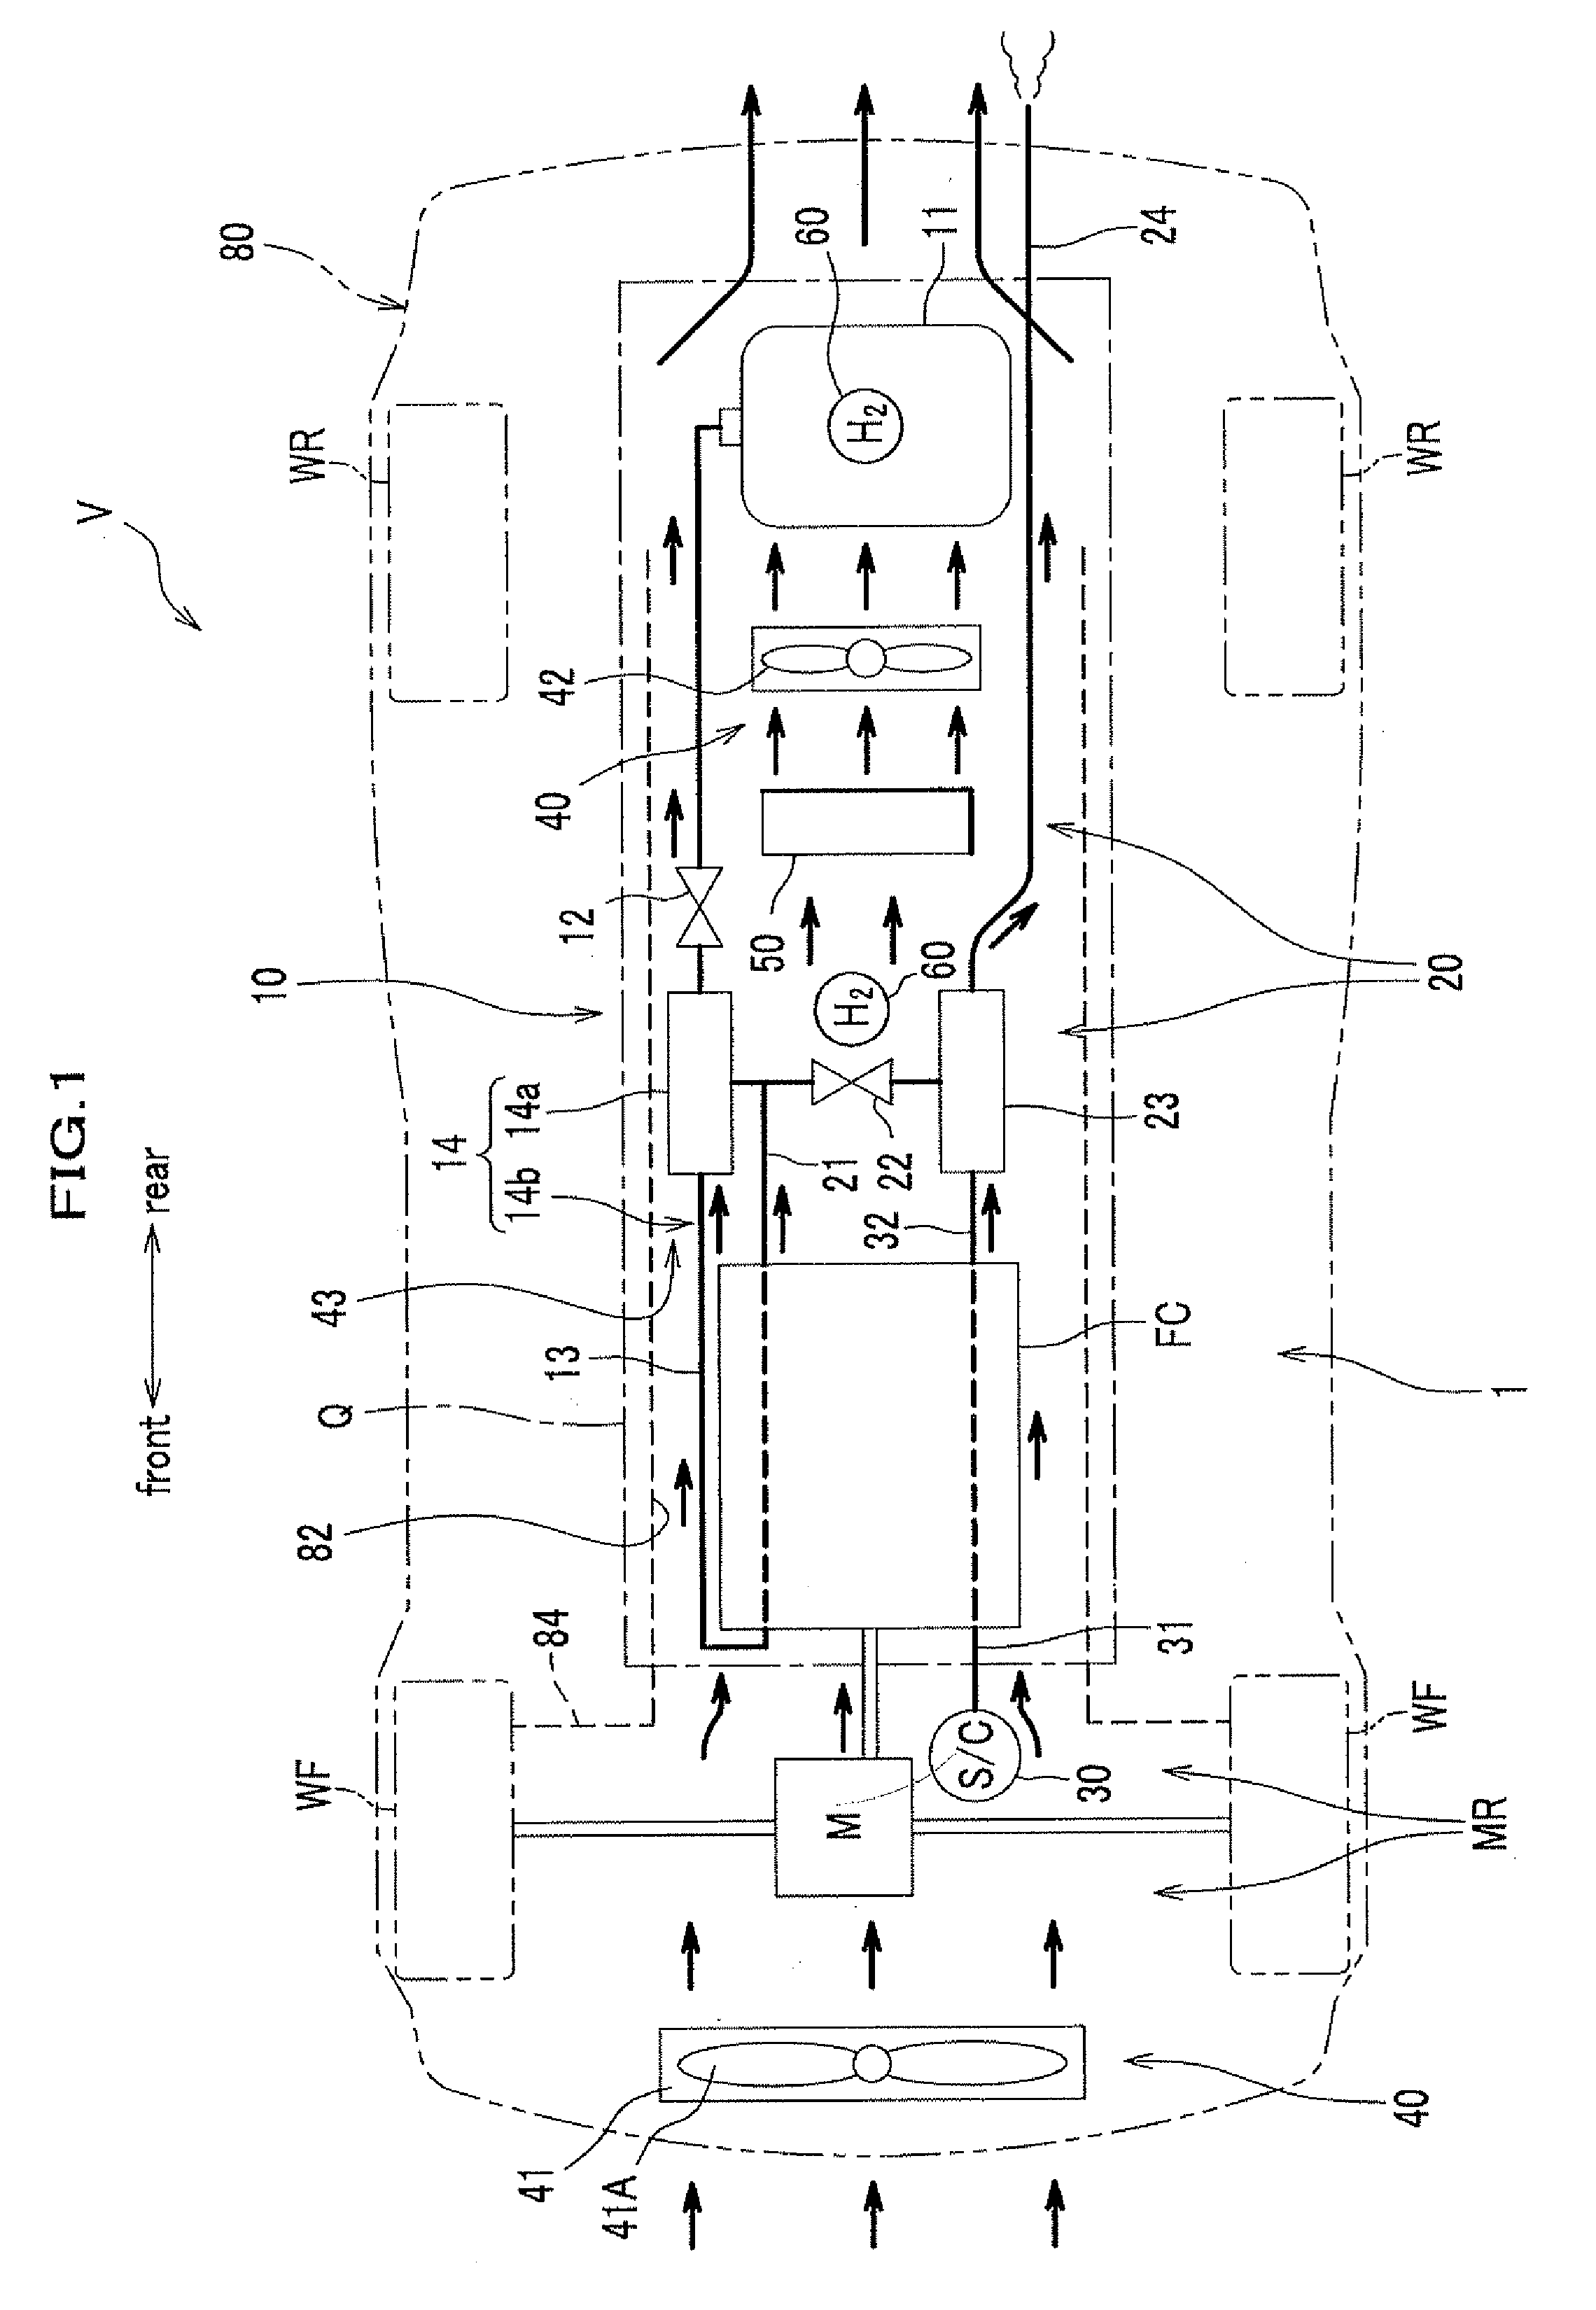 Ventilator of a fuel-cell vehicle